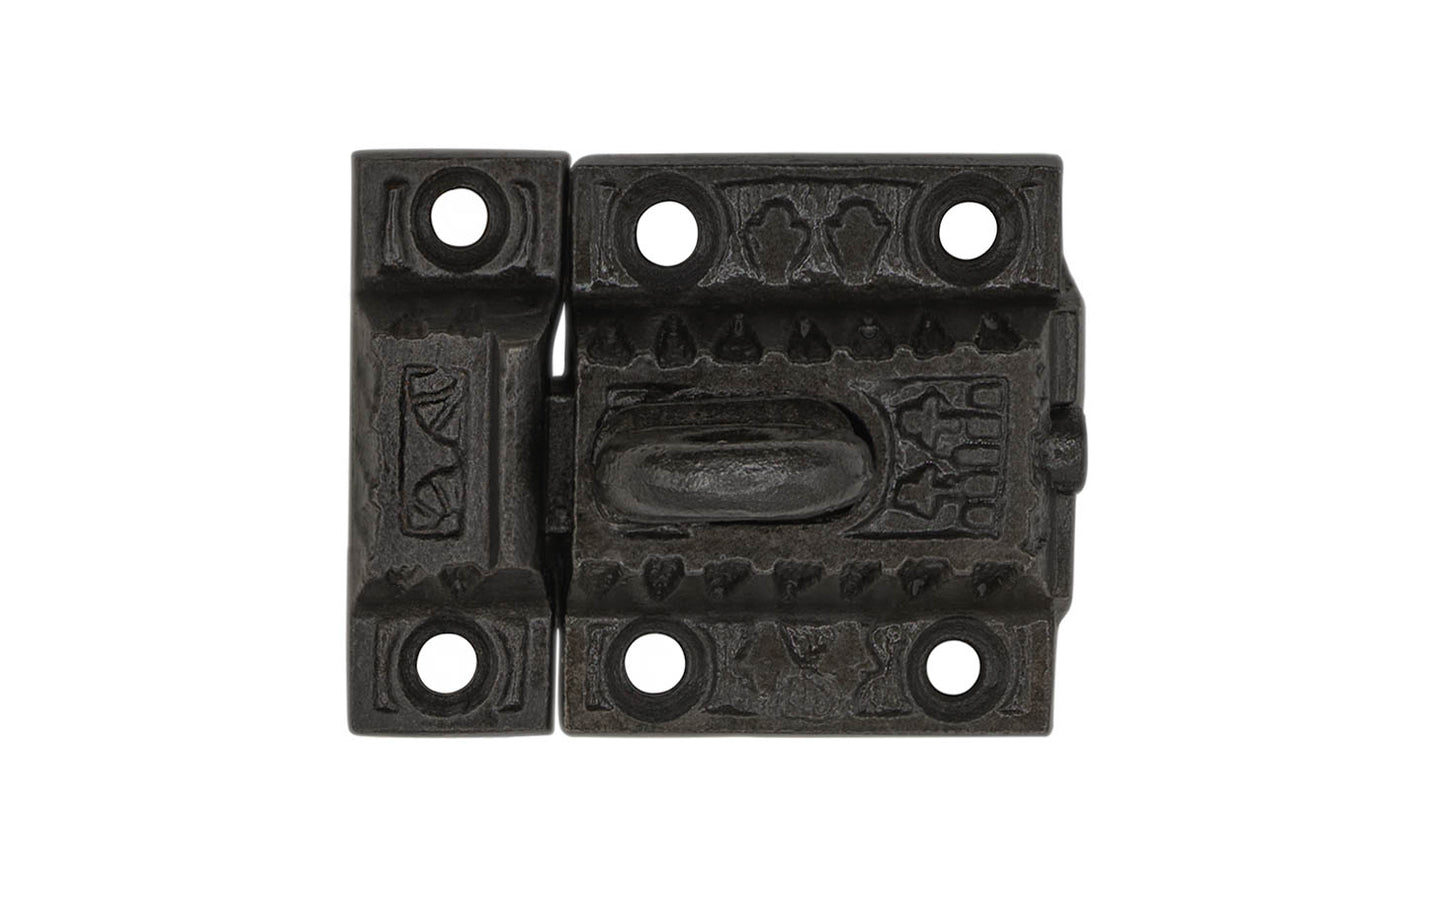 An Art-Deco style mini cast iron cupboard cabinet latch with a ring on top. Vintage-style cast iron finish. Durable & strong spring loaded mechanism. Includes 6 Phillips head screws. Great for cupboards, cabinets, etc.